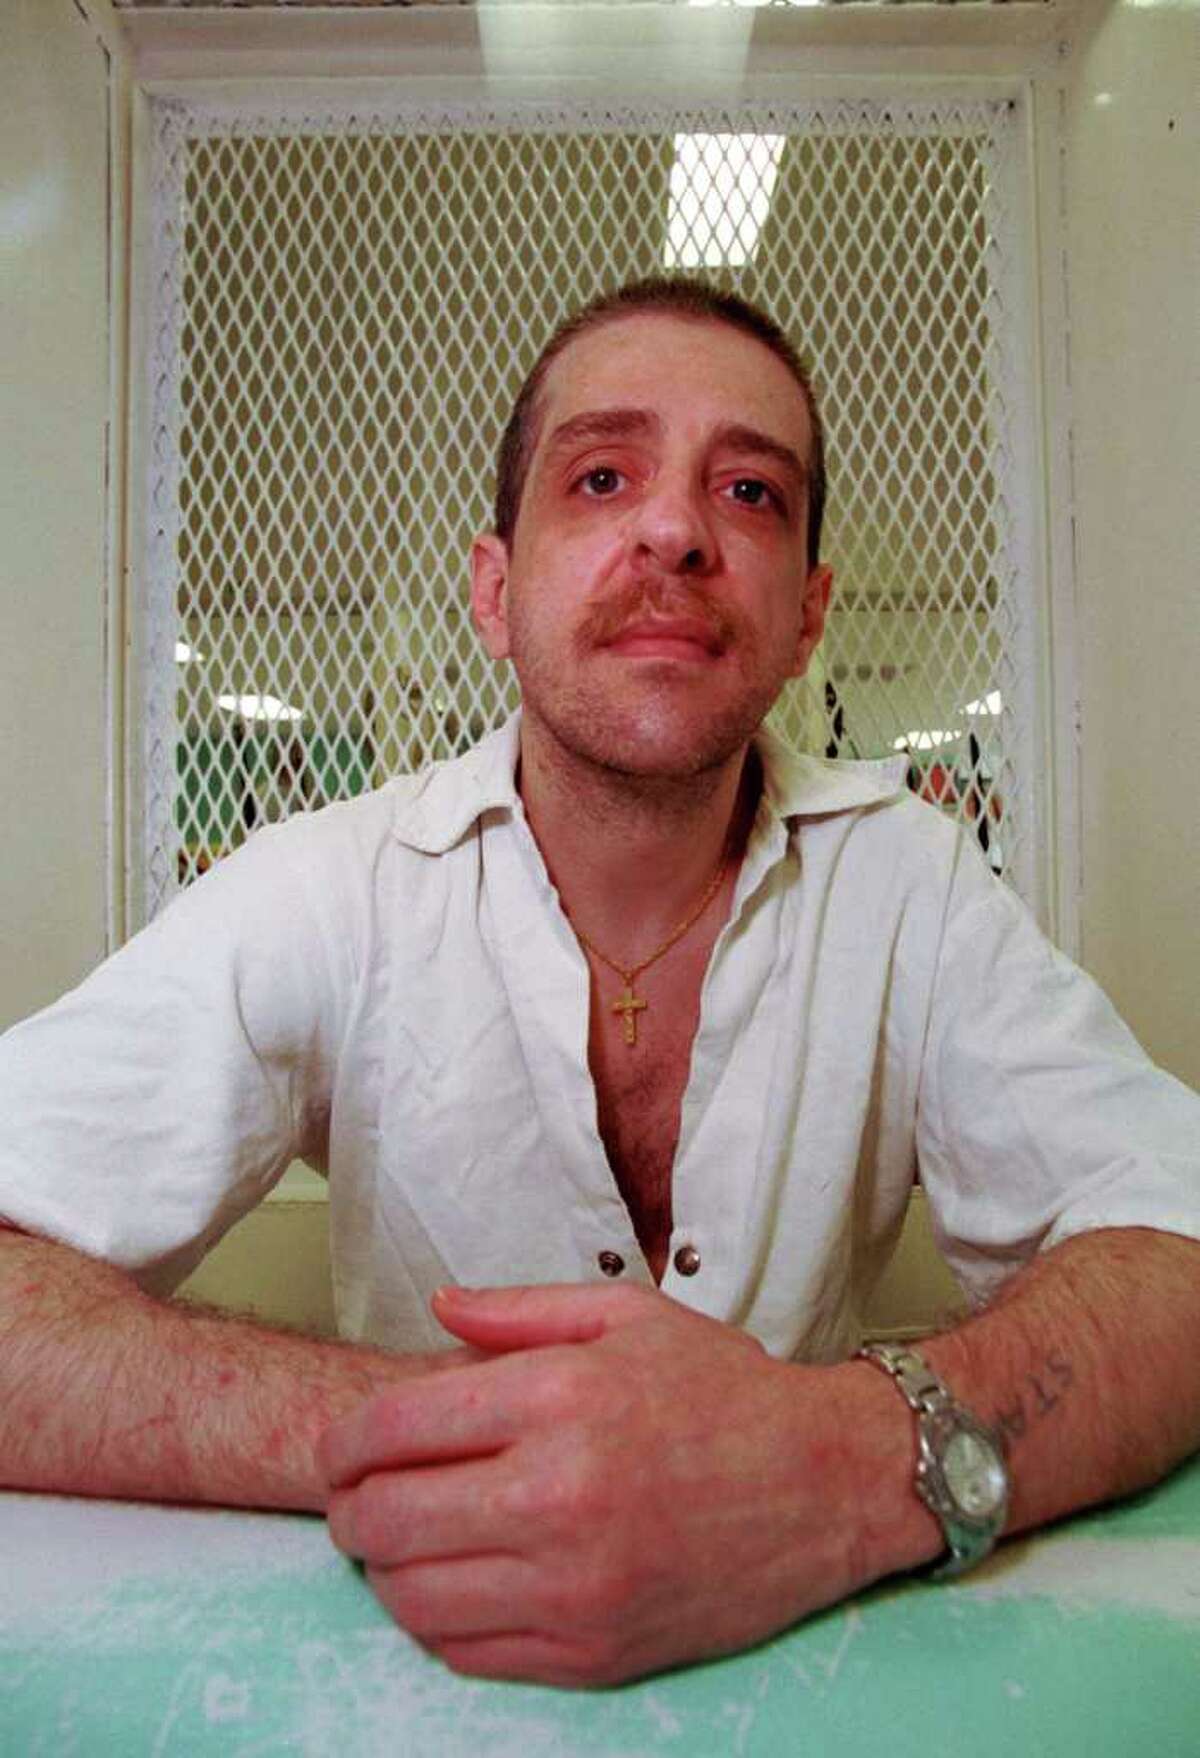 Henry Skinner is set to die Wednesday for a 1993 New Year's Eve triple murder.